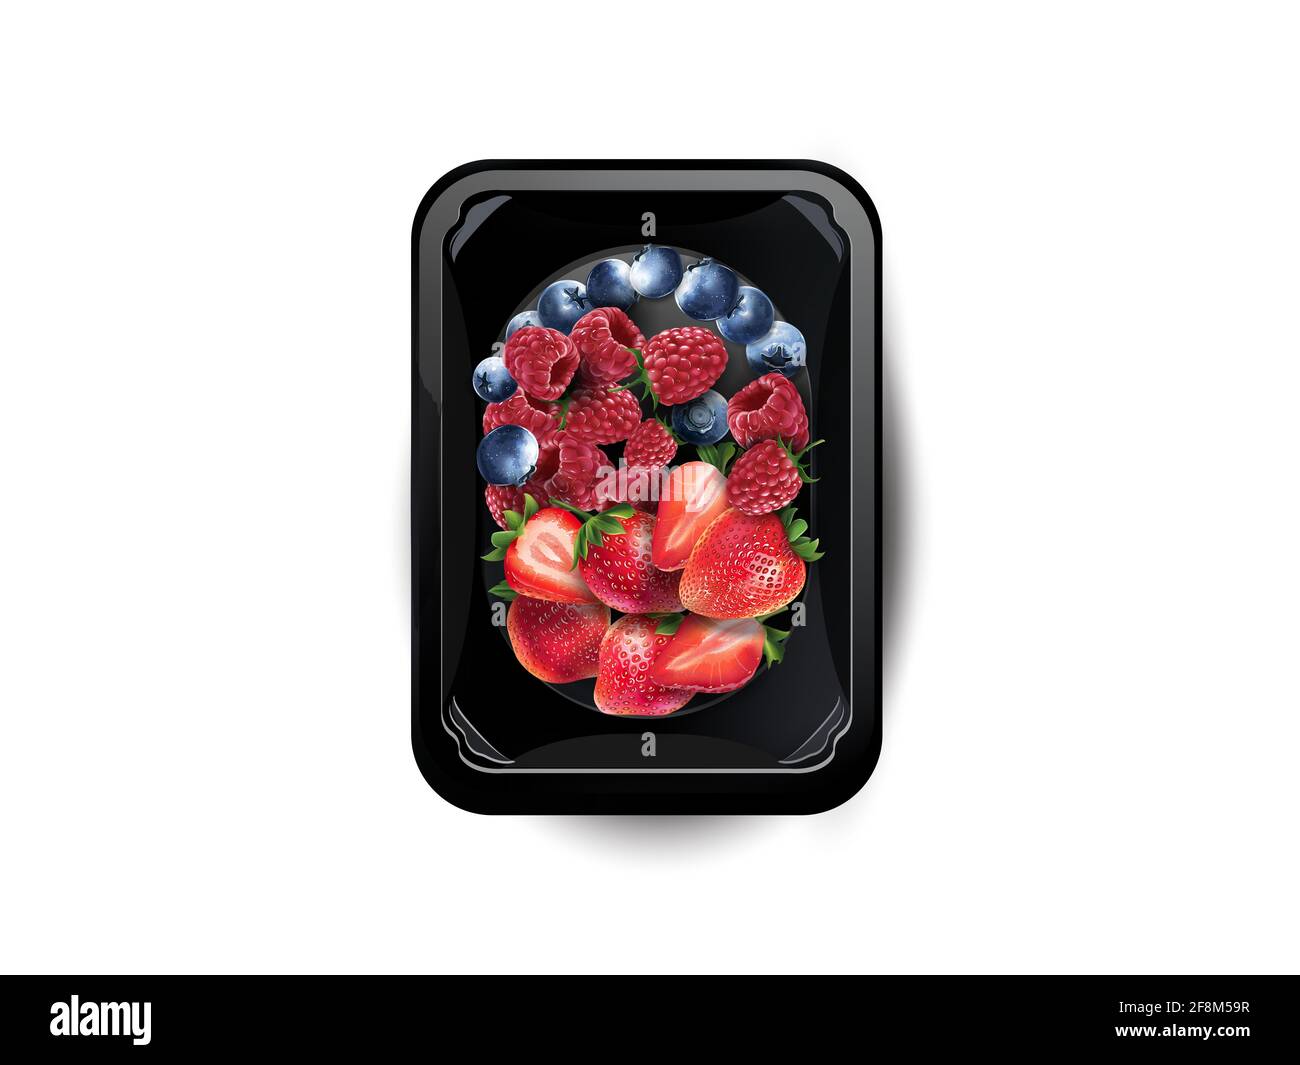 Blueberries, raspberries and strawberries in a lunchbox. Stock Photo